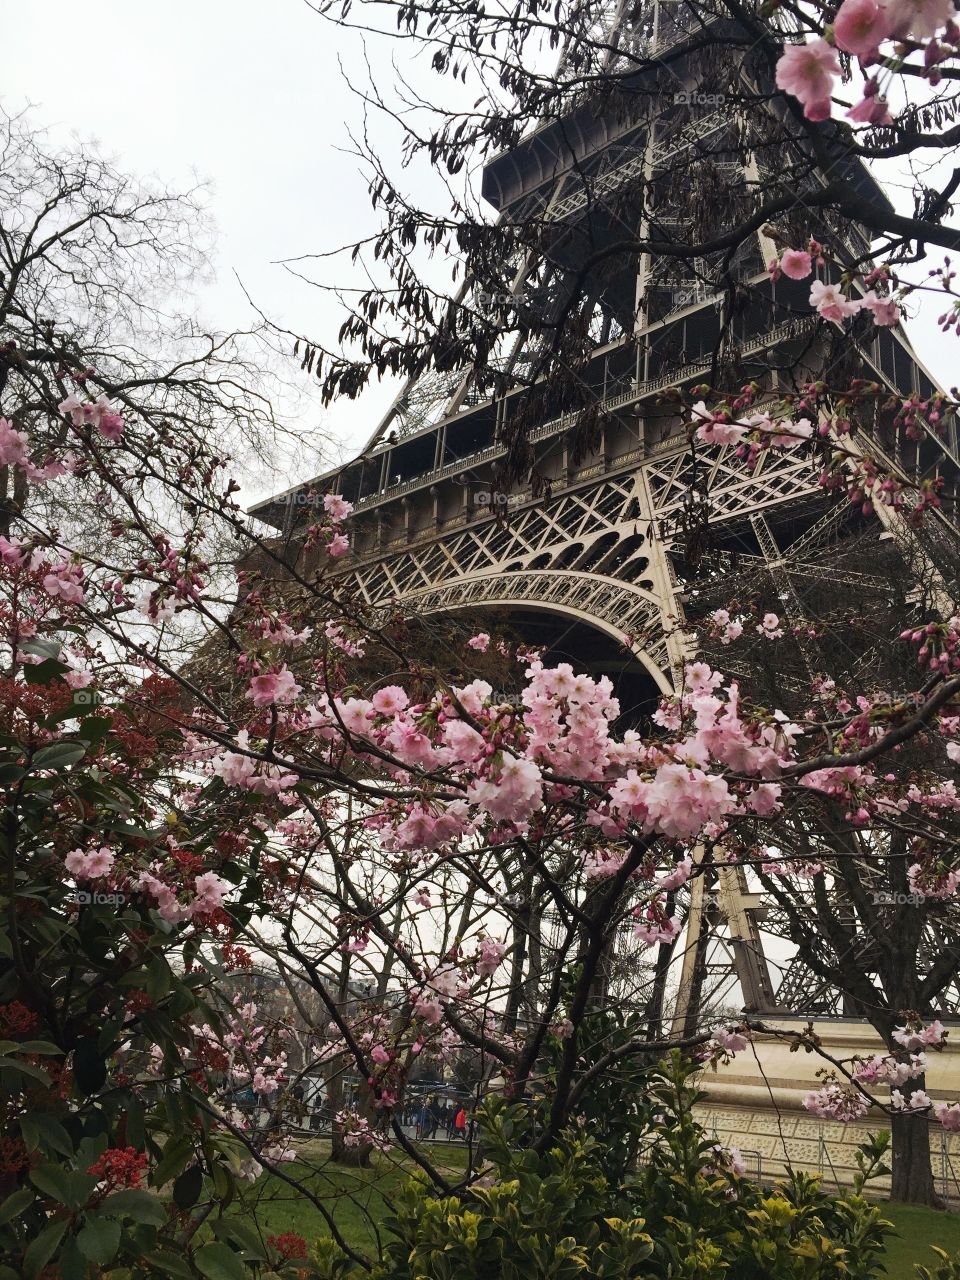 The Tower in Bloom